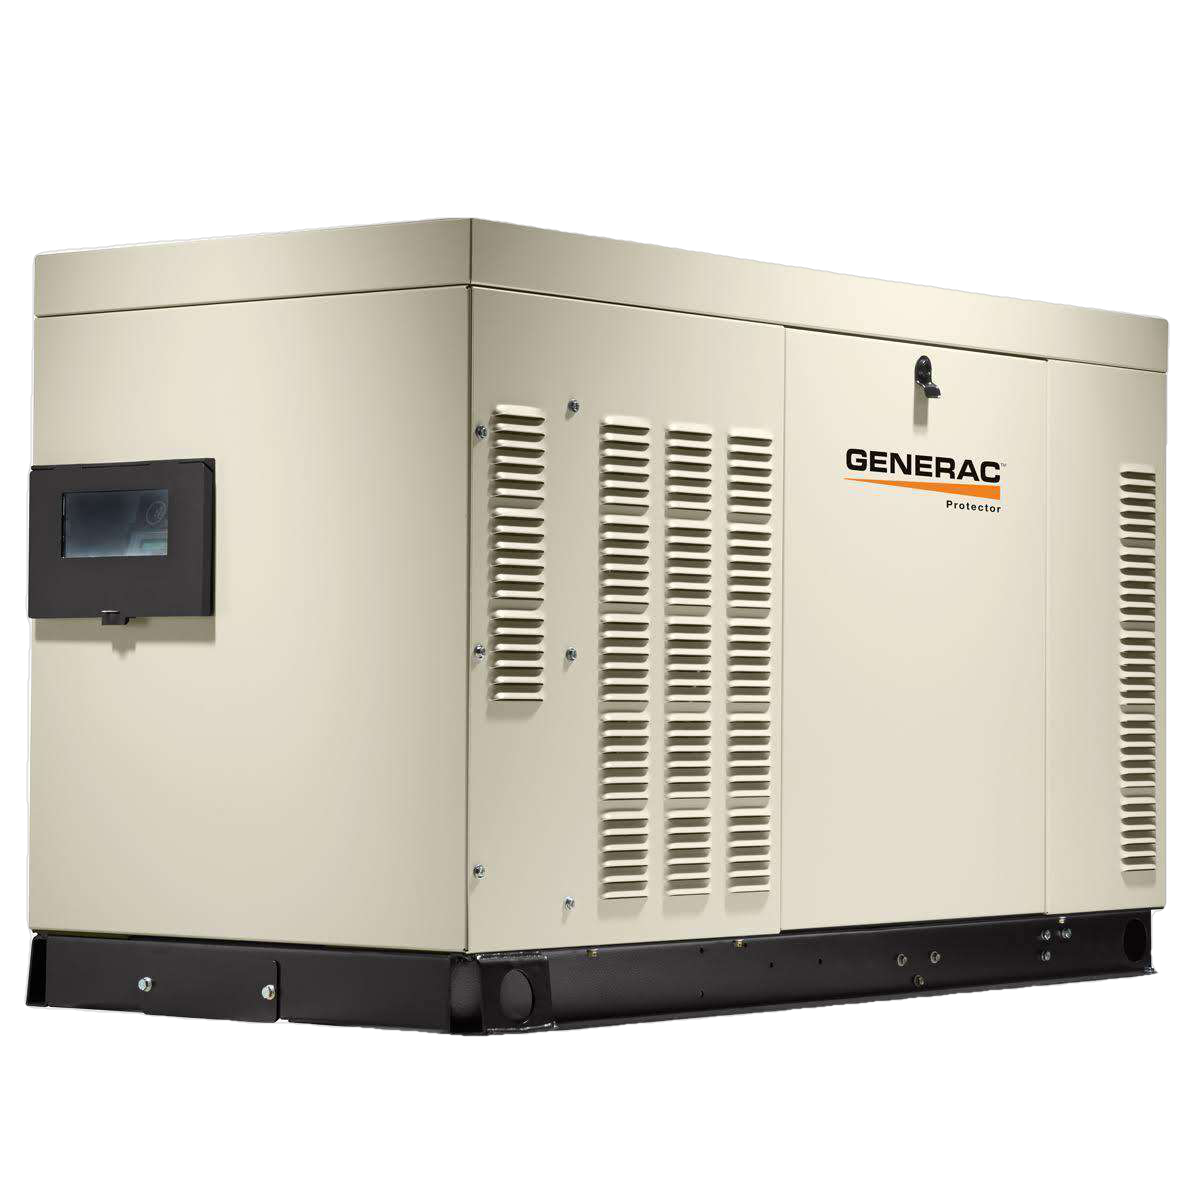 Generac Protector RG03015ANSX 30kW Liquid Cooled 1 Phase Standby Generator New